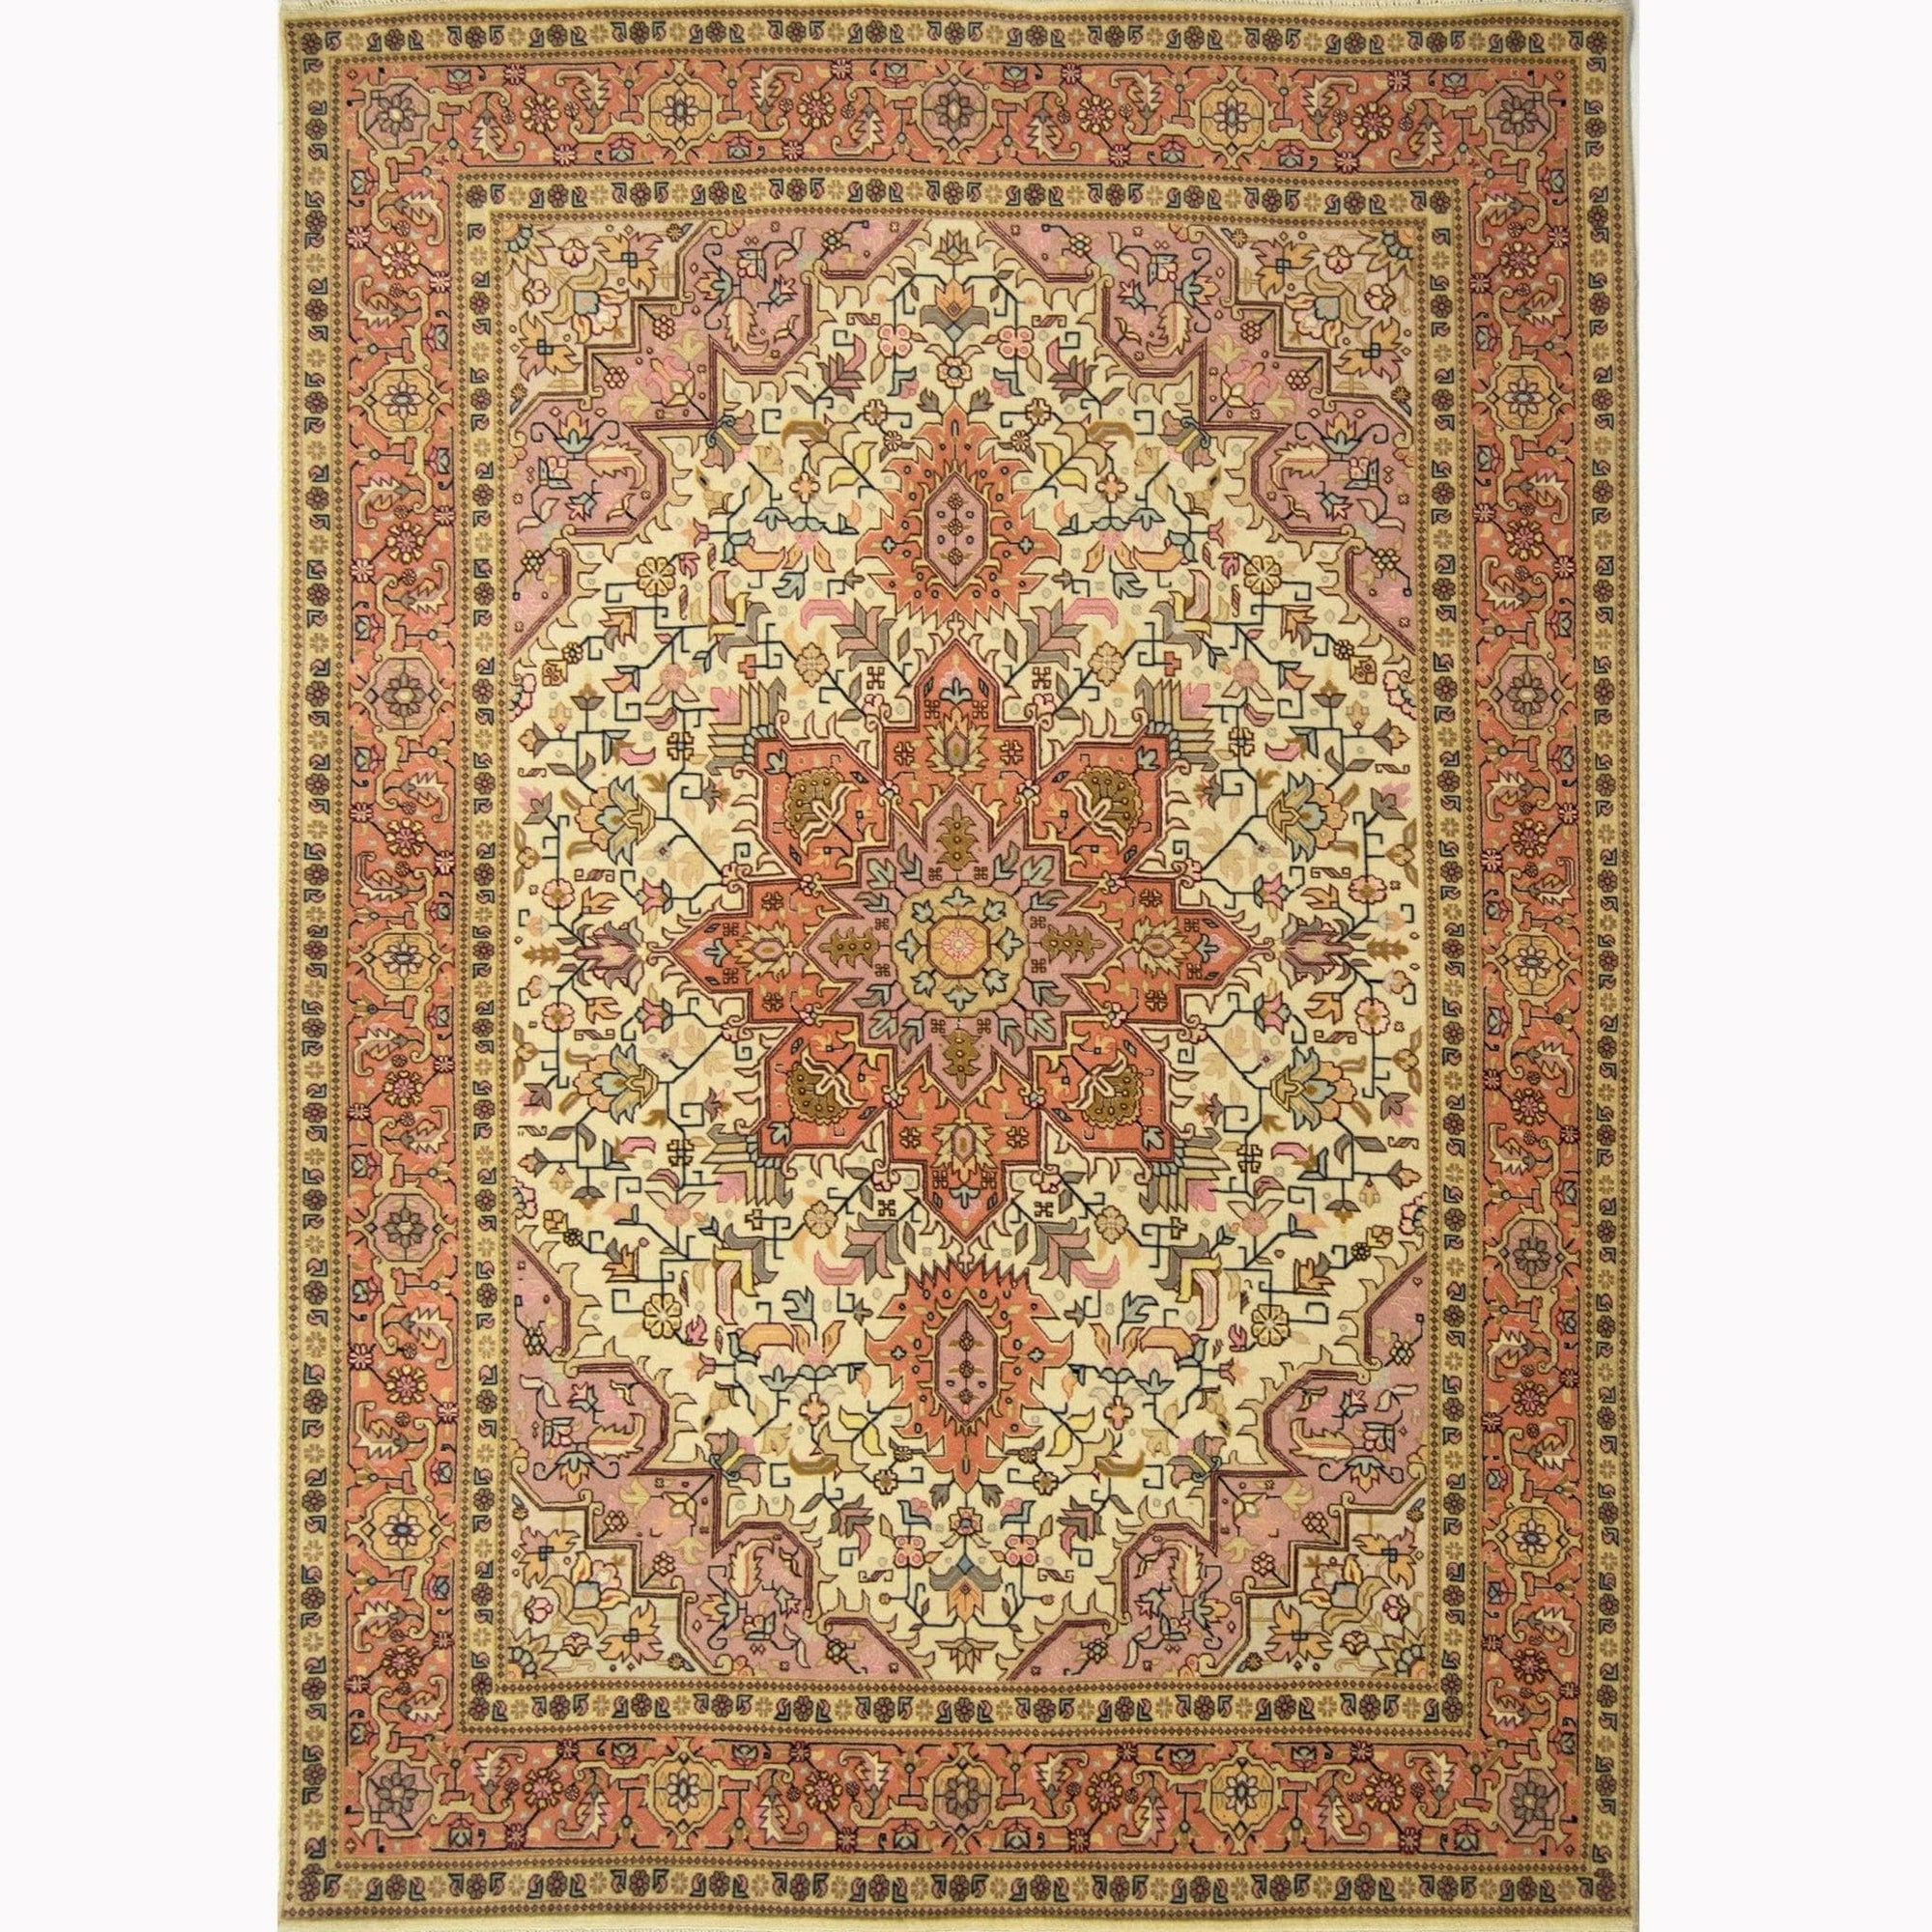 Super Fine Hand-knotted Persian Wool and Silk Tabriz Rug 154cm x 209cm